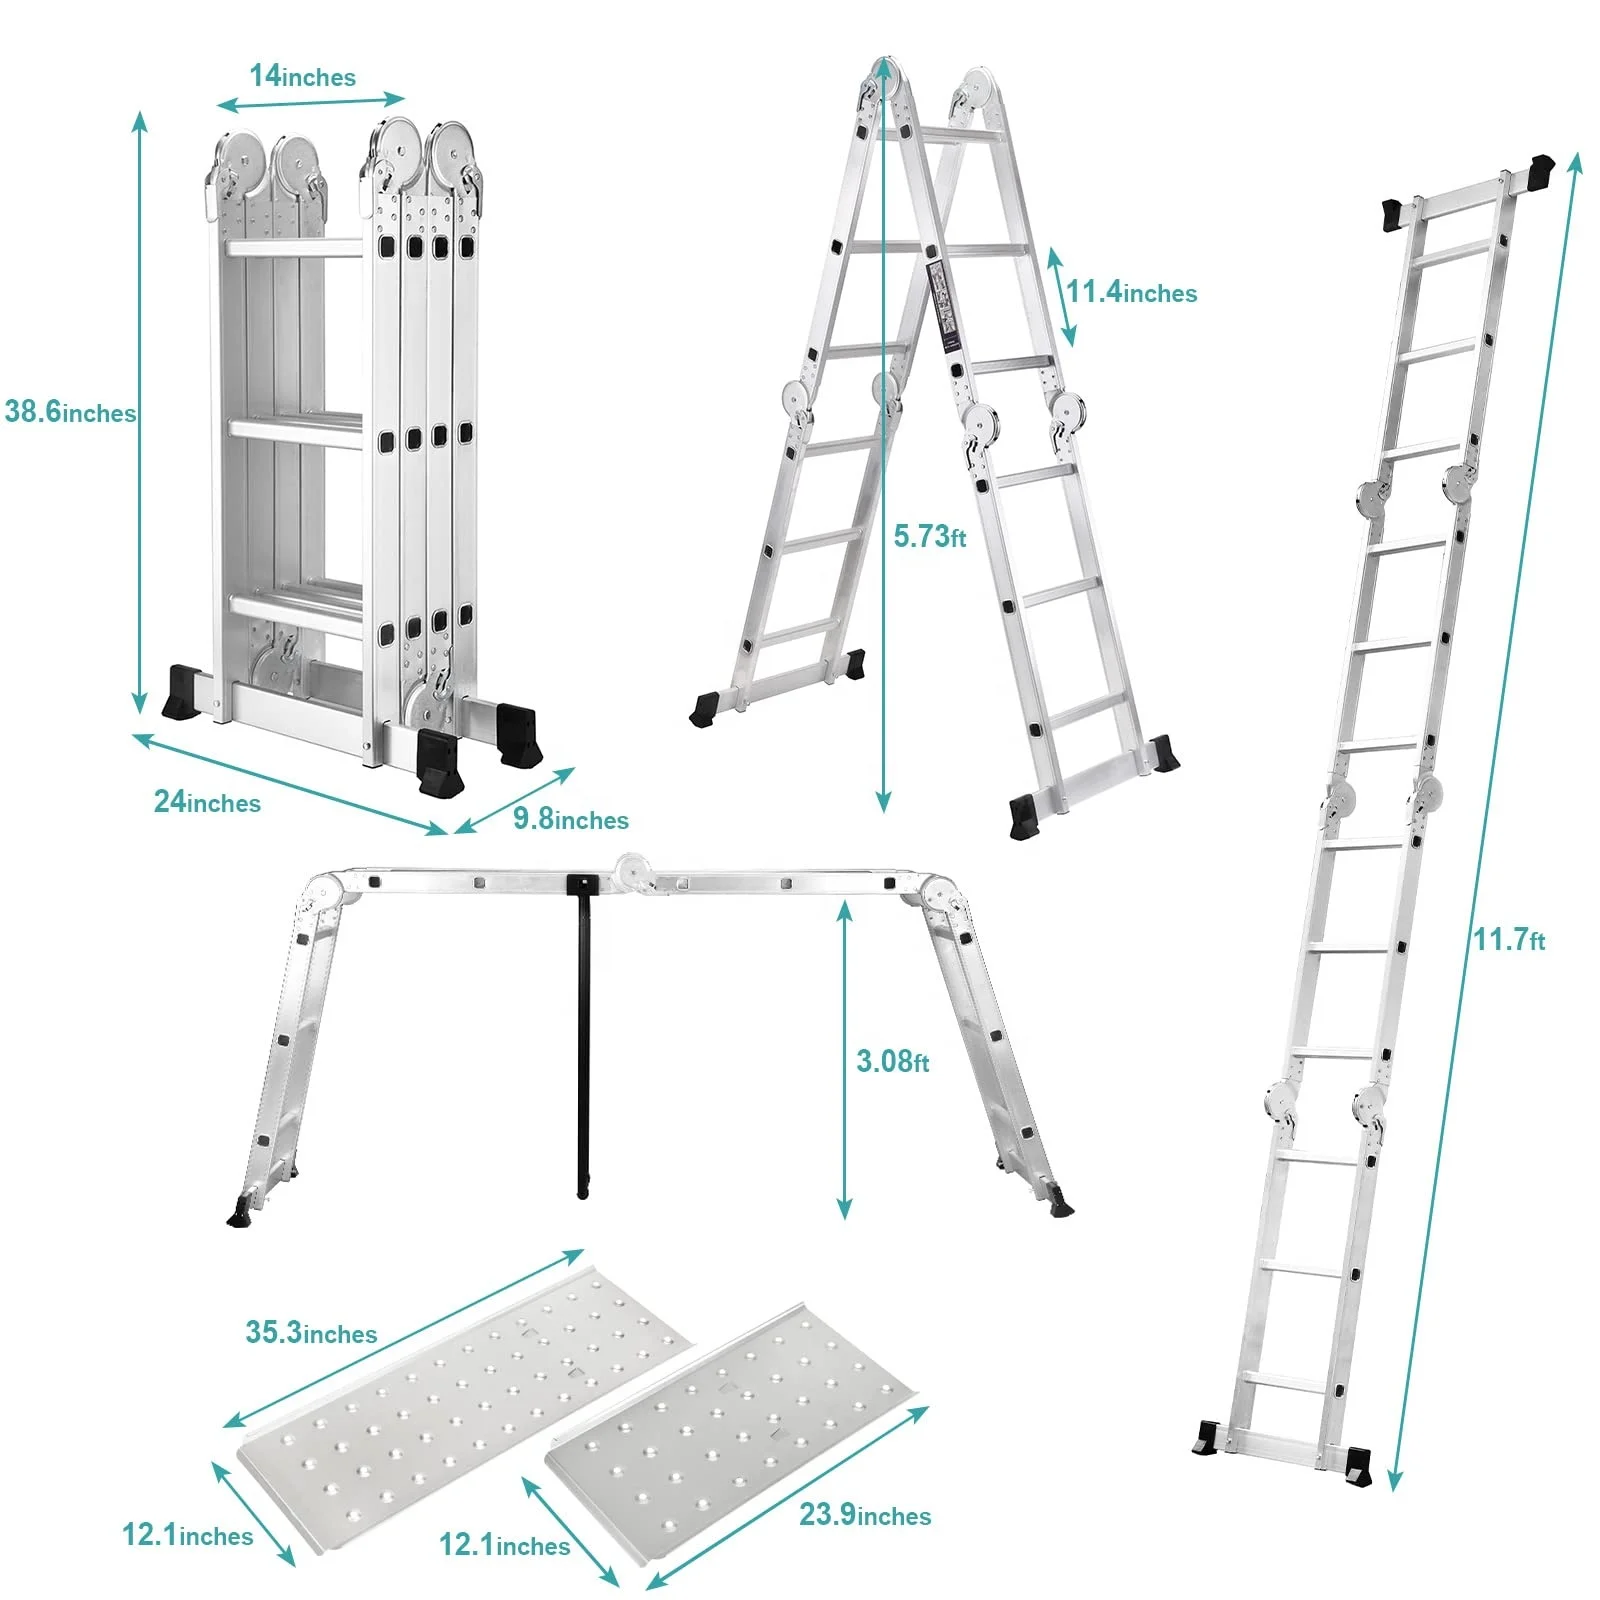 12 FT Aluminum Extension Ladder with Tool Tray, 2 Platform Plates, 7 in 1 Heavy Duty Collapsible Ladder